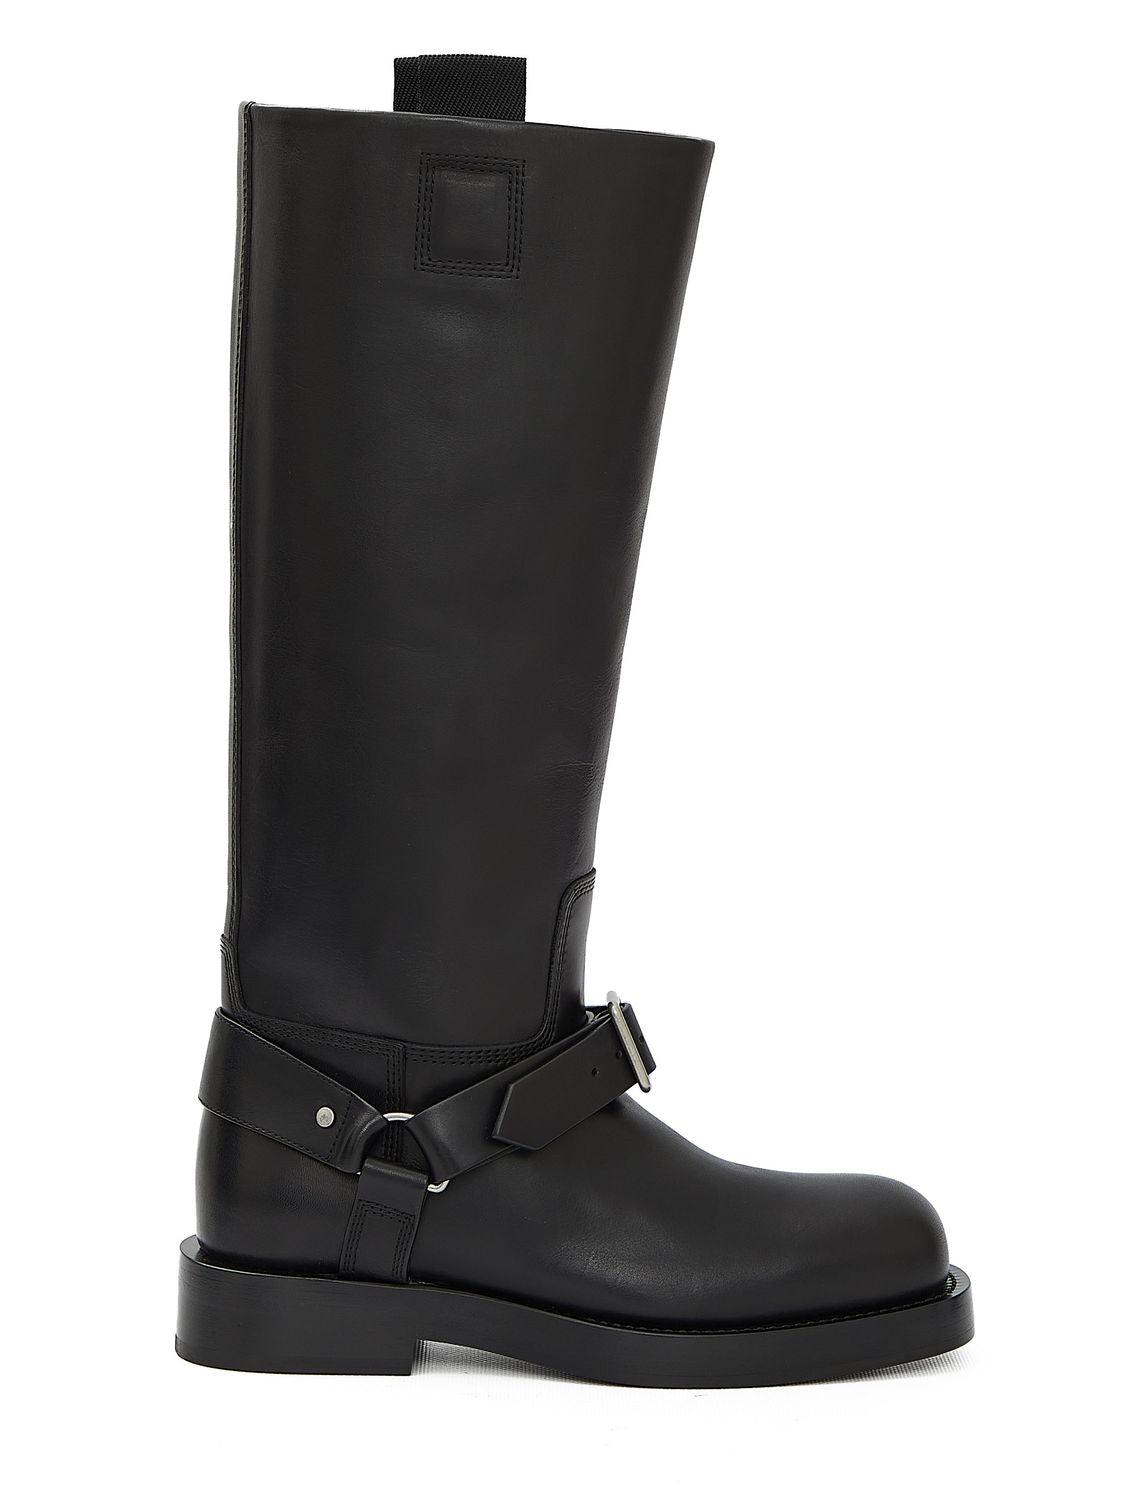 Saddle High Boots in Black Leather with Silver-Tone Buckle Detailing